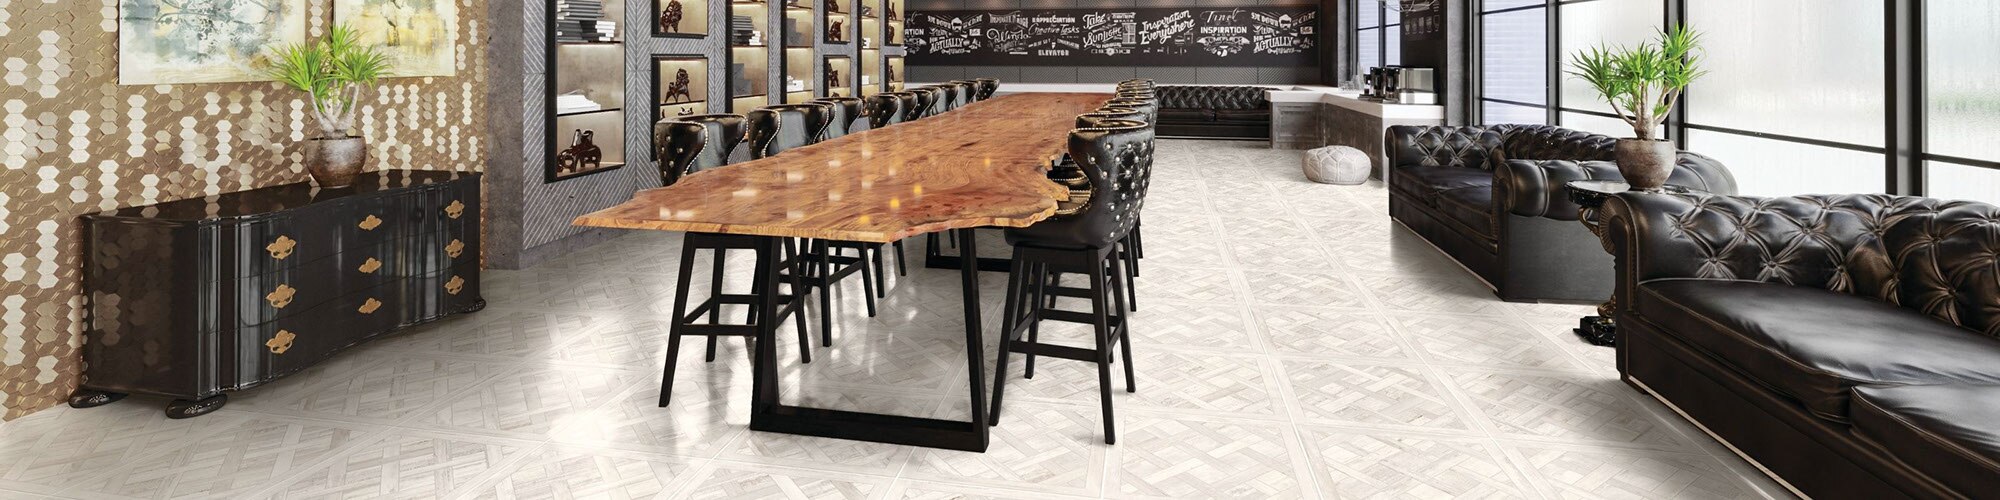 Industrial conference room with cassettone pattern floor tile that looks like white-washed wood, raw edge long table with leather chairs, and leather couches.